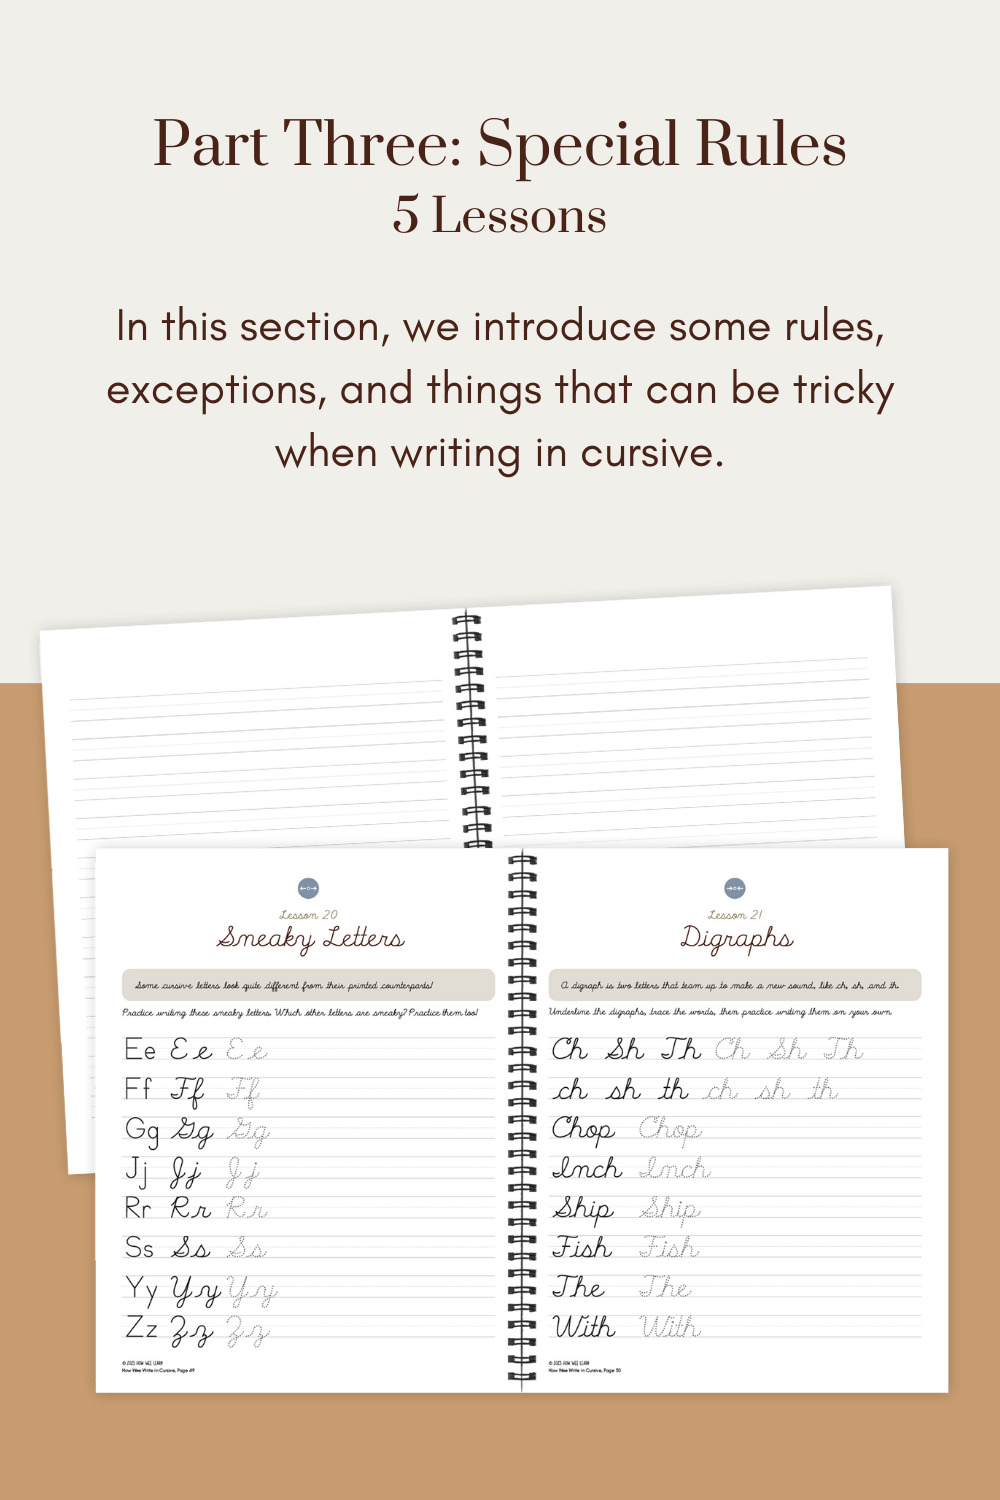 Part Three: Special Rules (5 Lessons). In this section, we introduce some rules, exceptions, and things that can be tricky when writing in cursive.